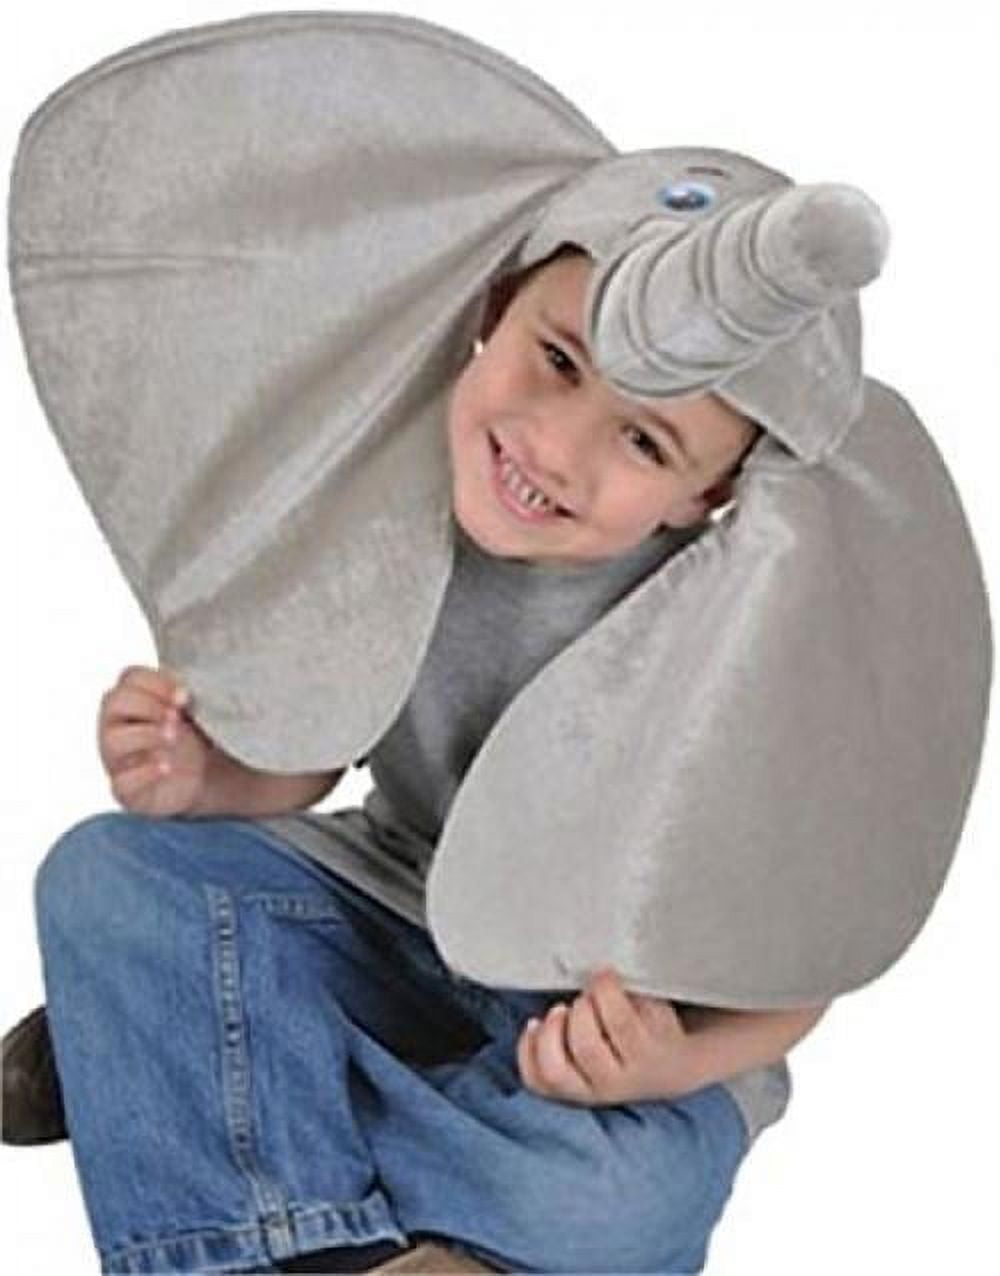 Skeleteen Elephant Nose Costume Accessory - Pretend Play Animal Elephant  Noses for Adults and Kids Gray